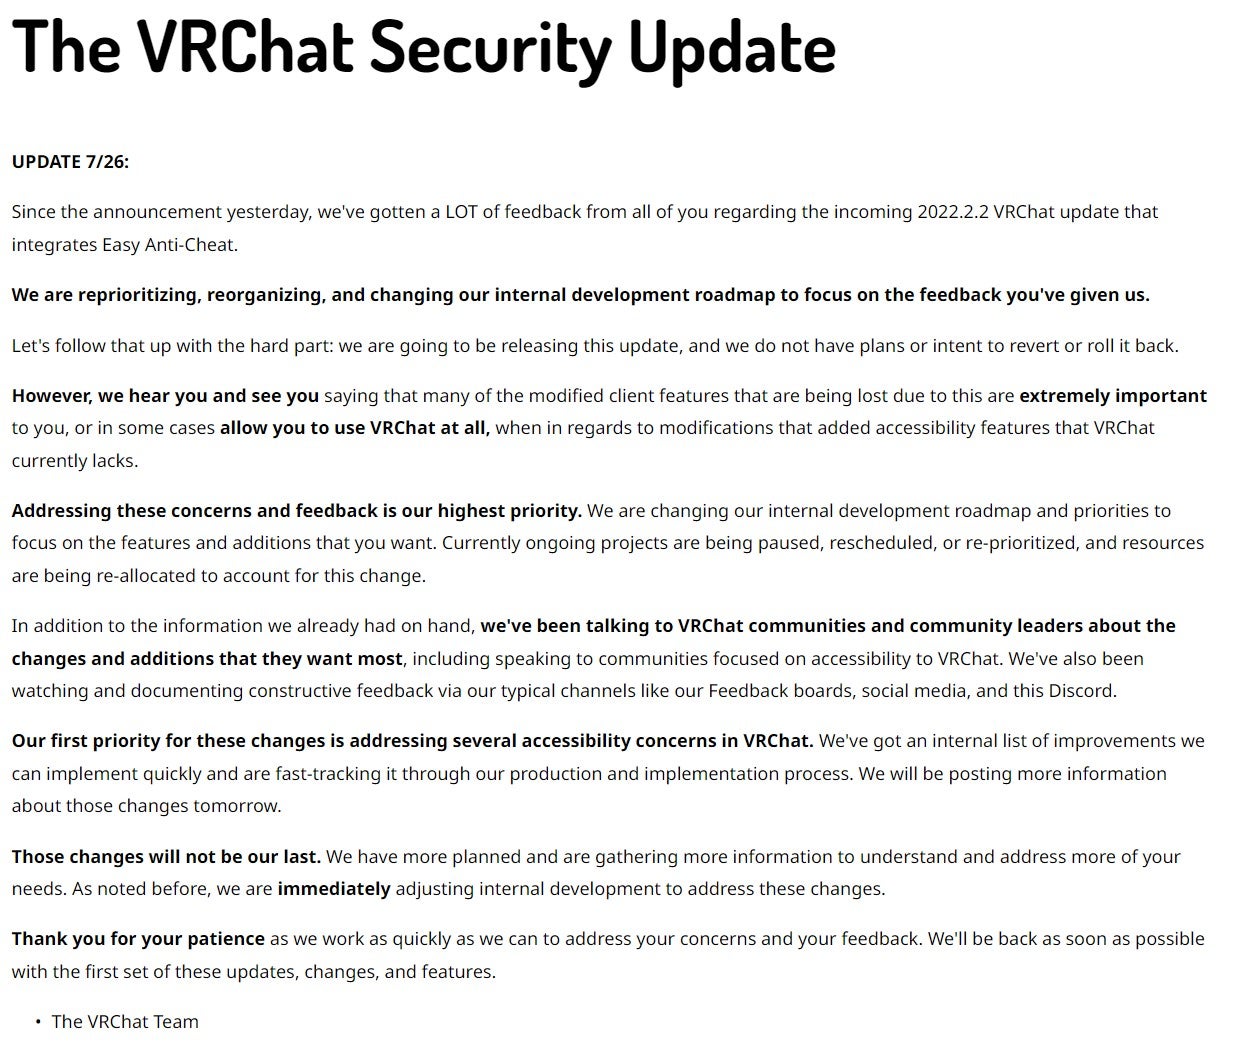 Update to VRChat's blog post announcing the Easy Anti-Cheat update.